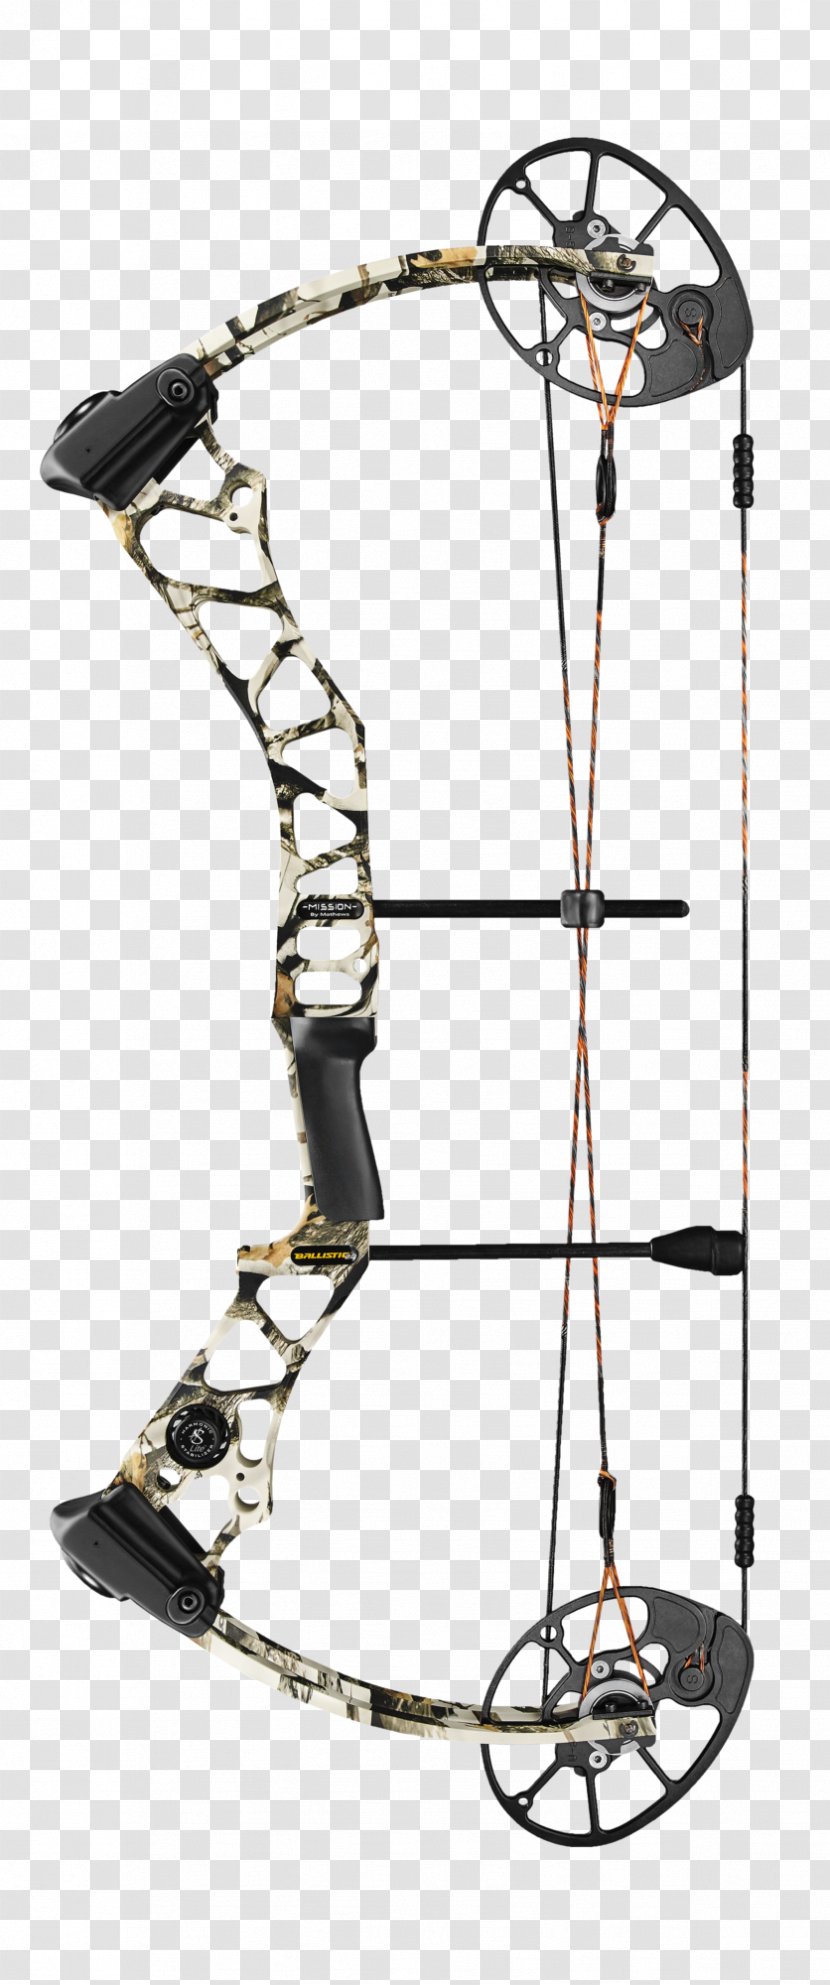 Bow And Arrow Compound Bows Bowhunting Archery - MISSION Transparent PNG